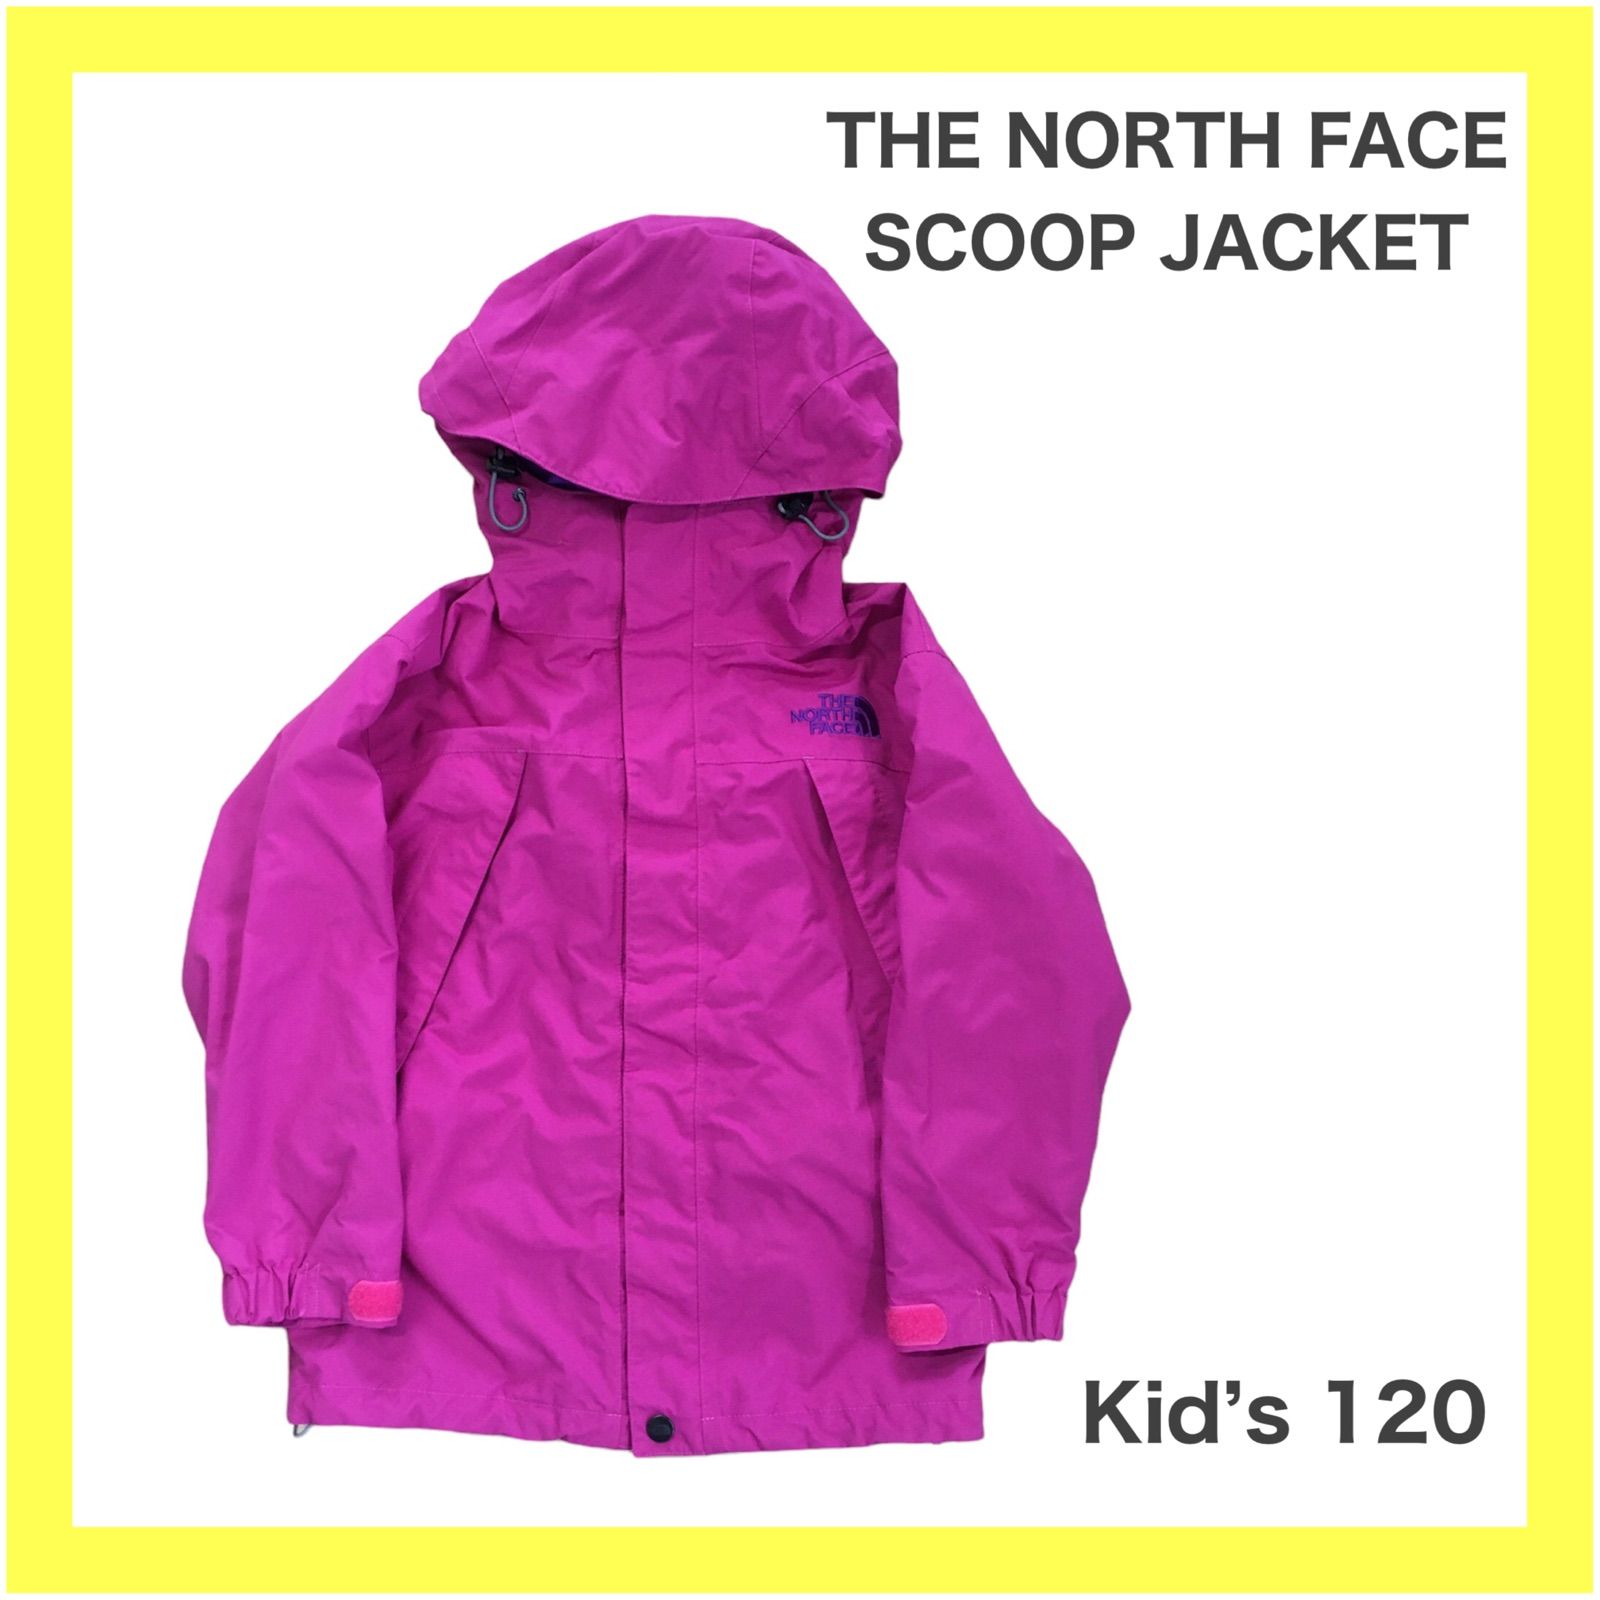 THE NORTH FACE】キッズ スクープジャケット 120 美品-